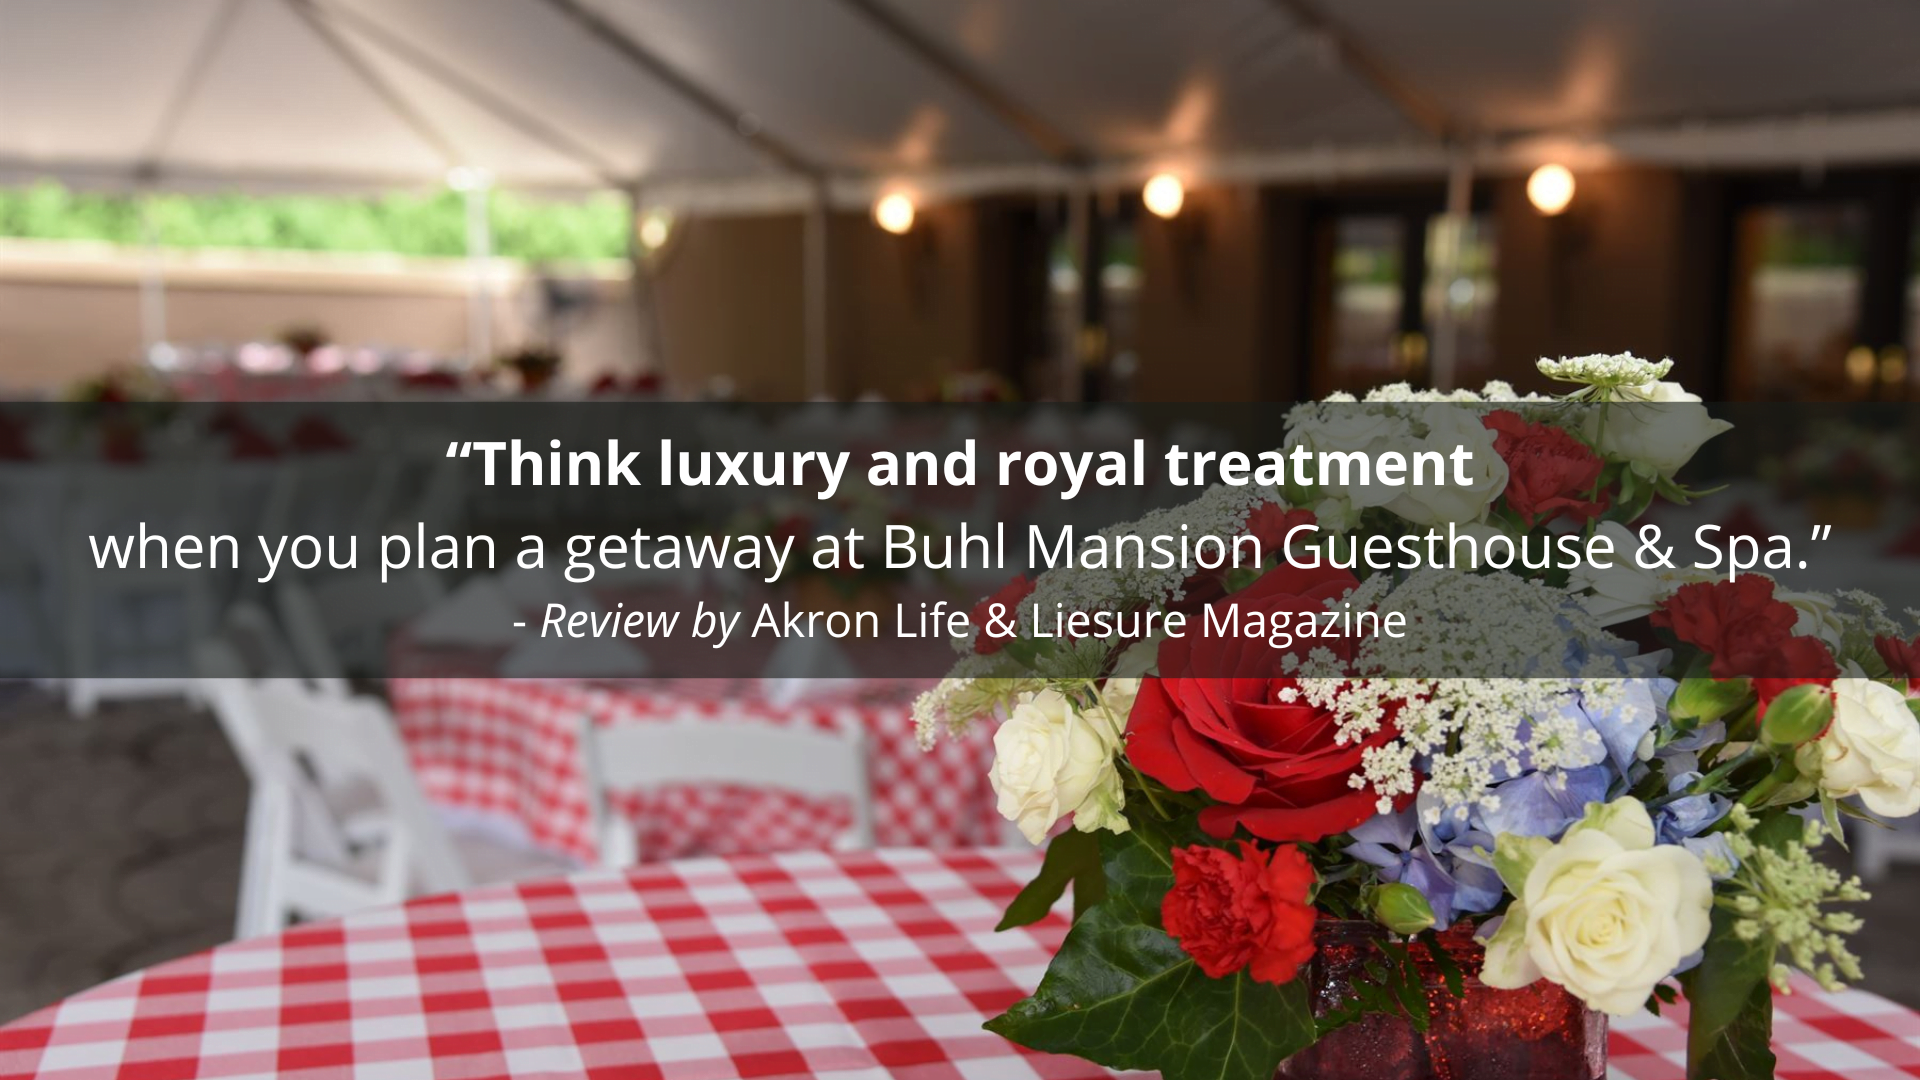 "Think luxury and royal treatment when you plan a getaway at Buhl Mansion Guesthouse & Spa." - Review by Akron Life & Leisure Magazine